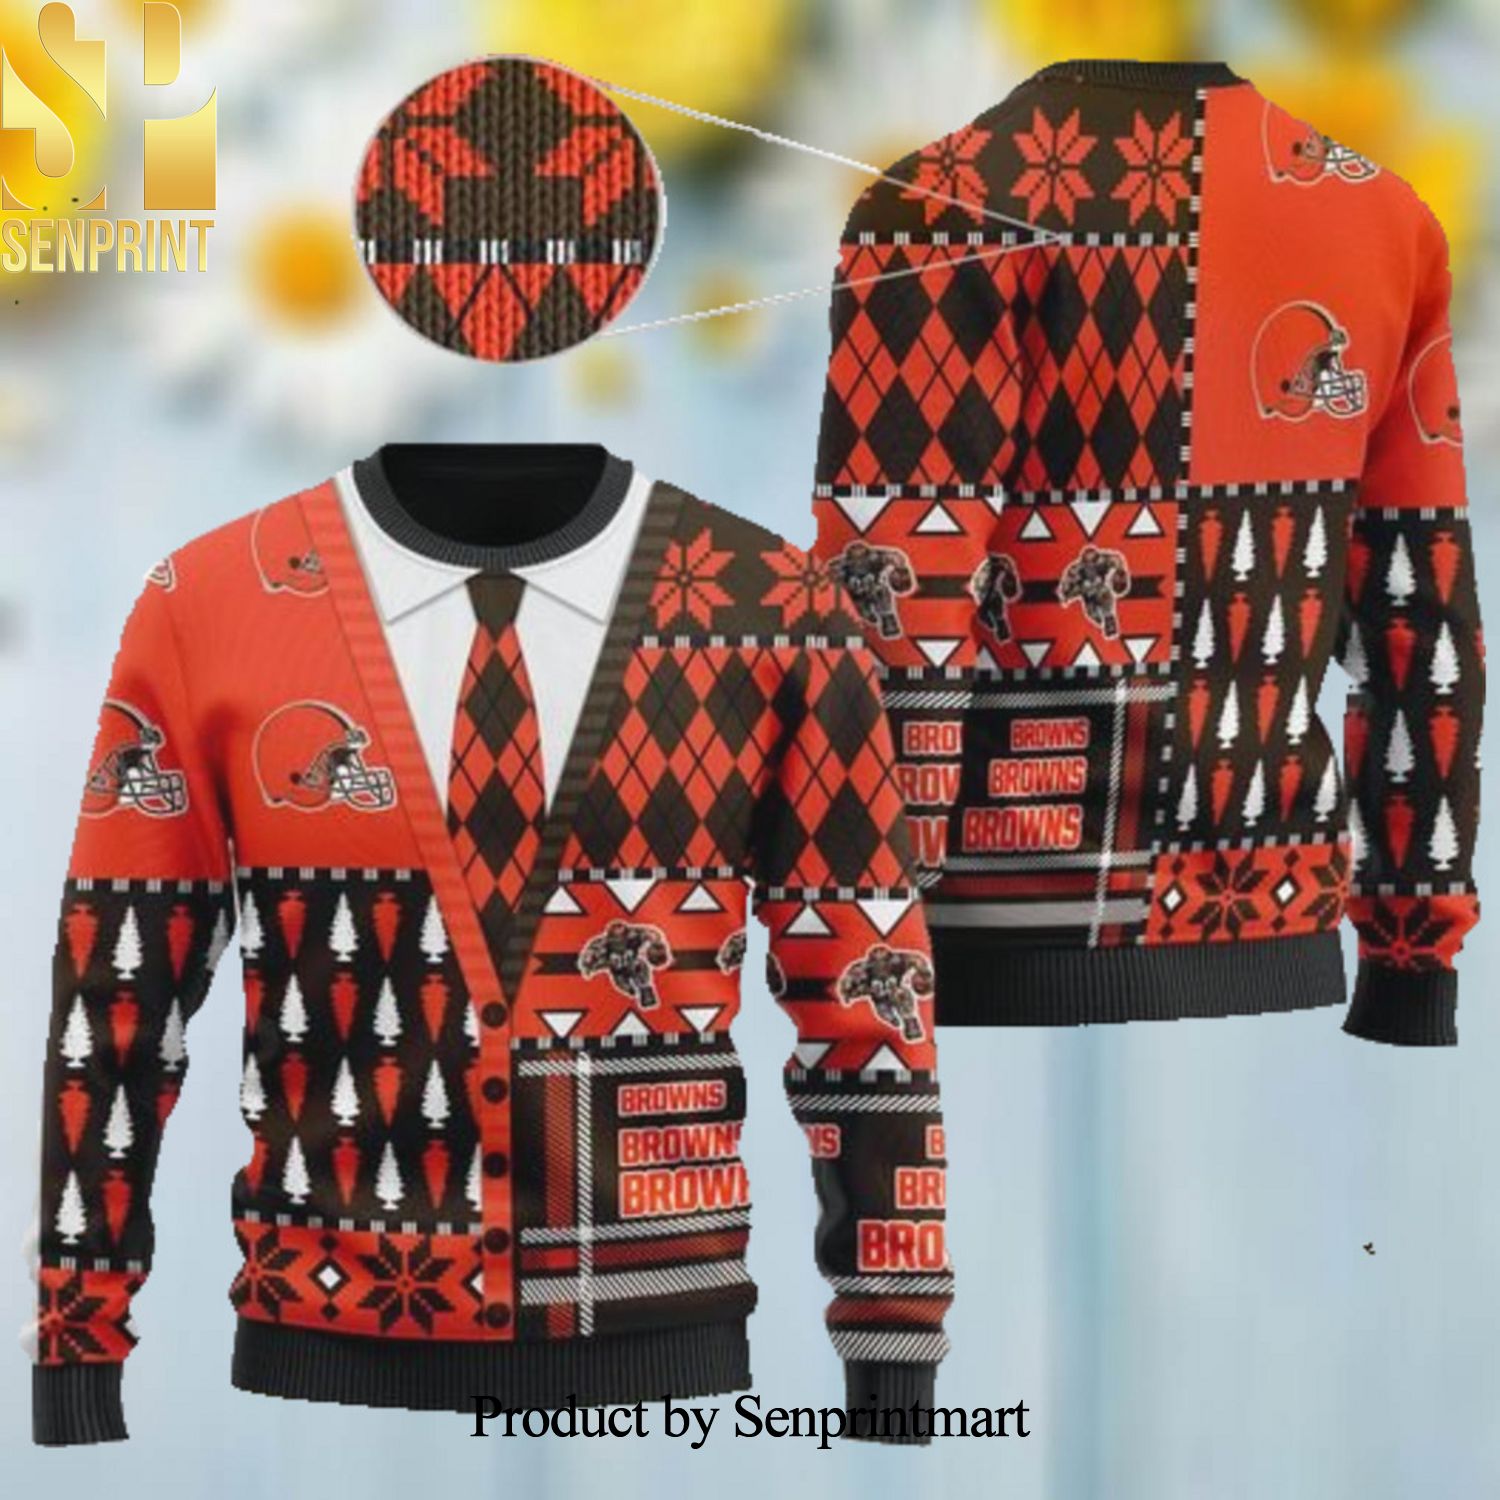 Cleveland Browns NFL American Football Team Cardigan Style 3D Printed Ugly Christmas Sweater